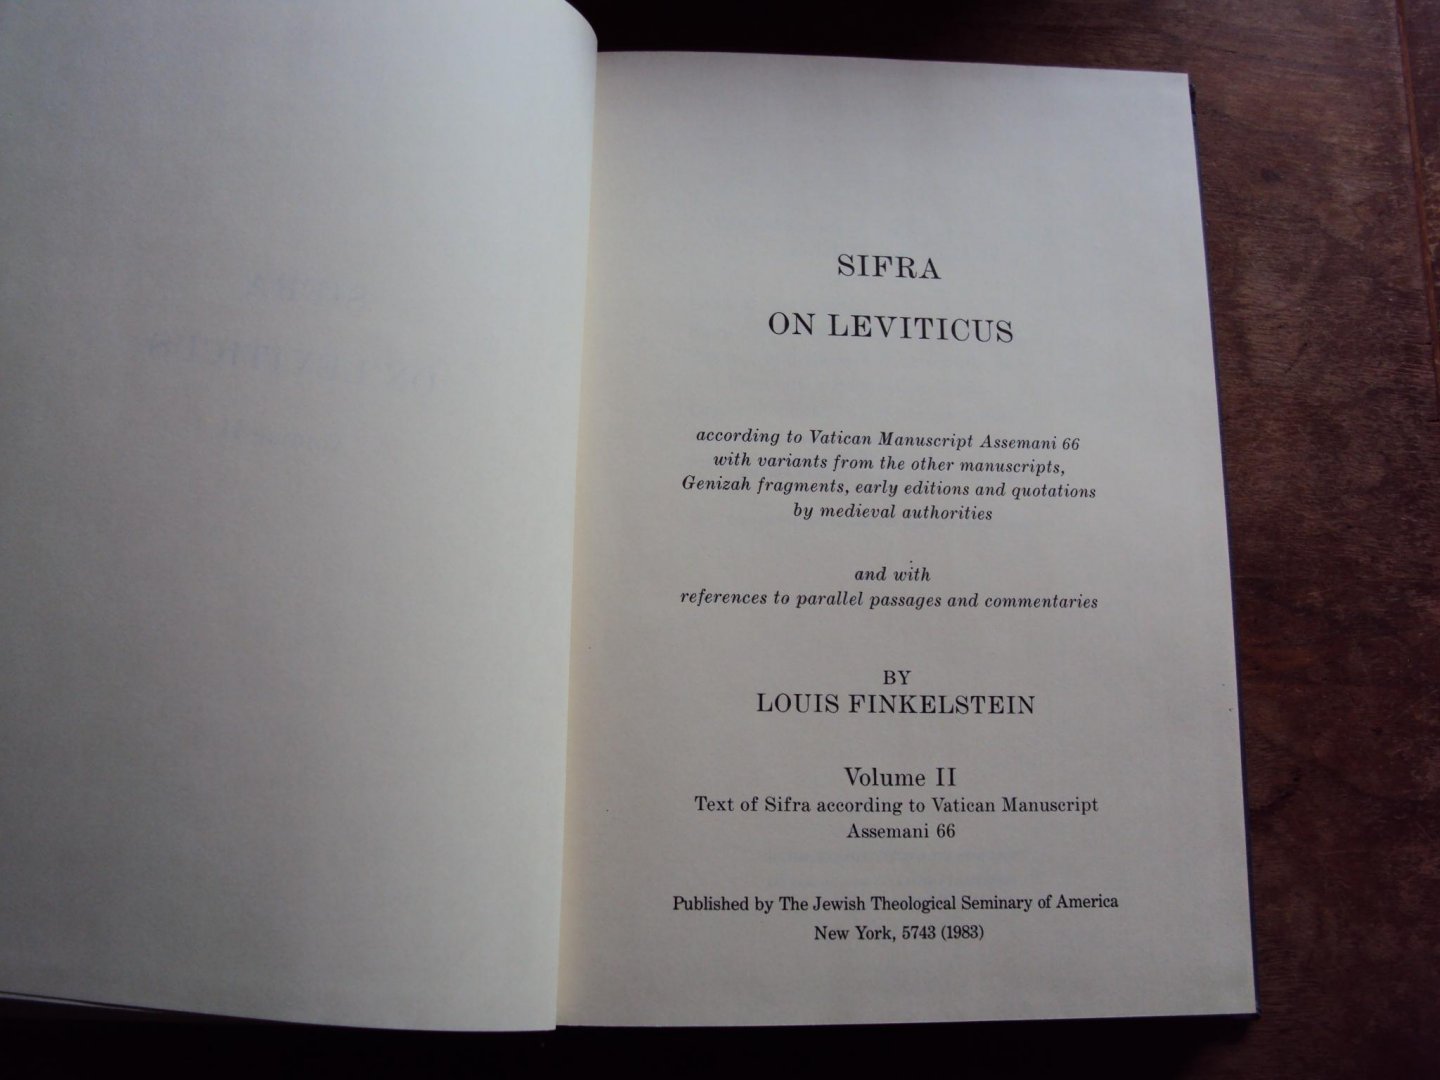 Finkelstein, Louis - Sifra on Leviticus, Vol. II. Text of Sifra according to Vatican Manuscript Assemani 66